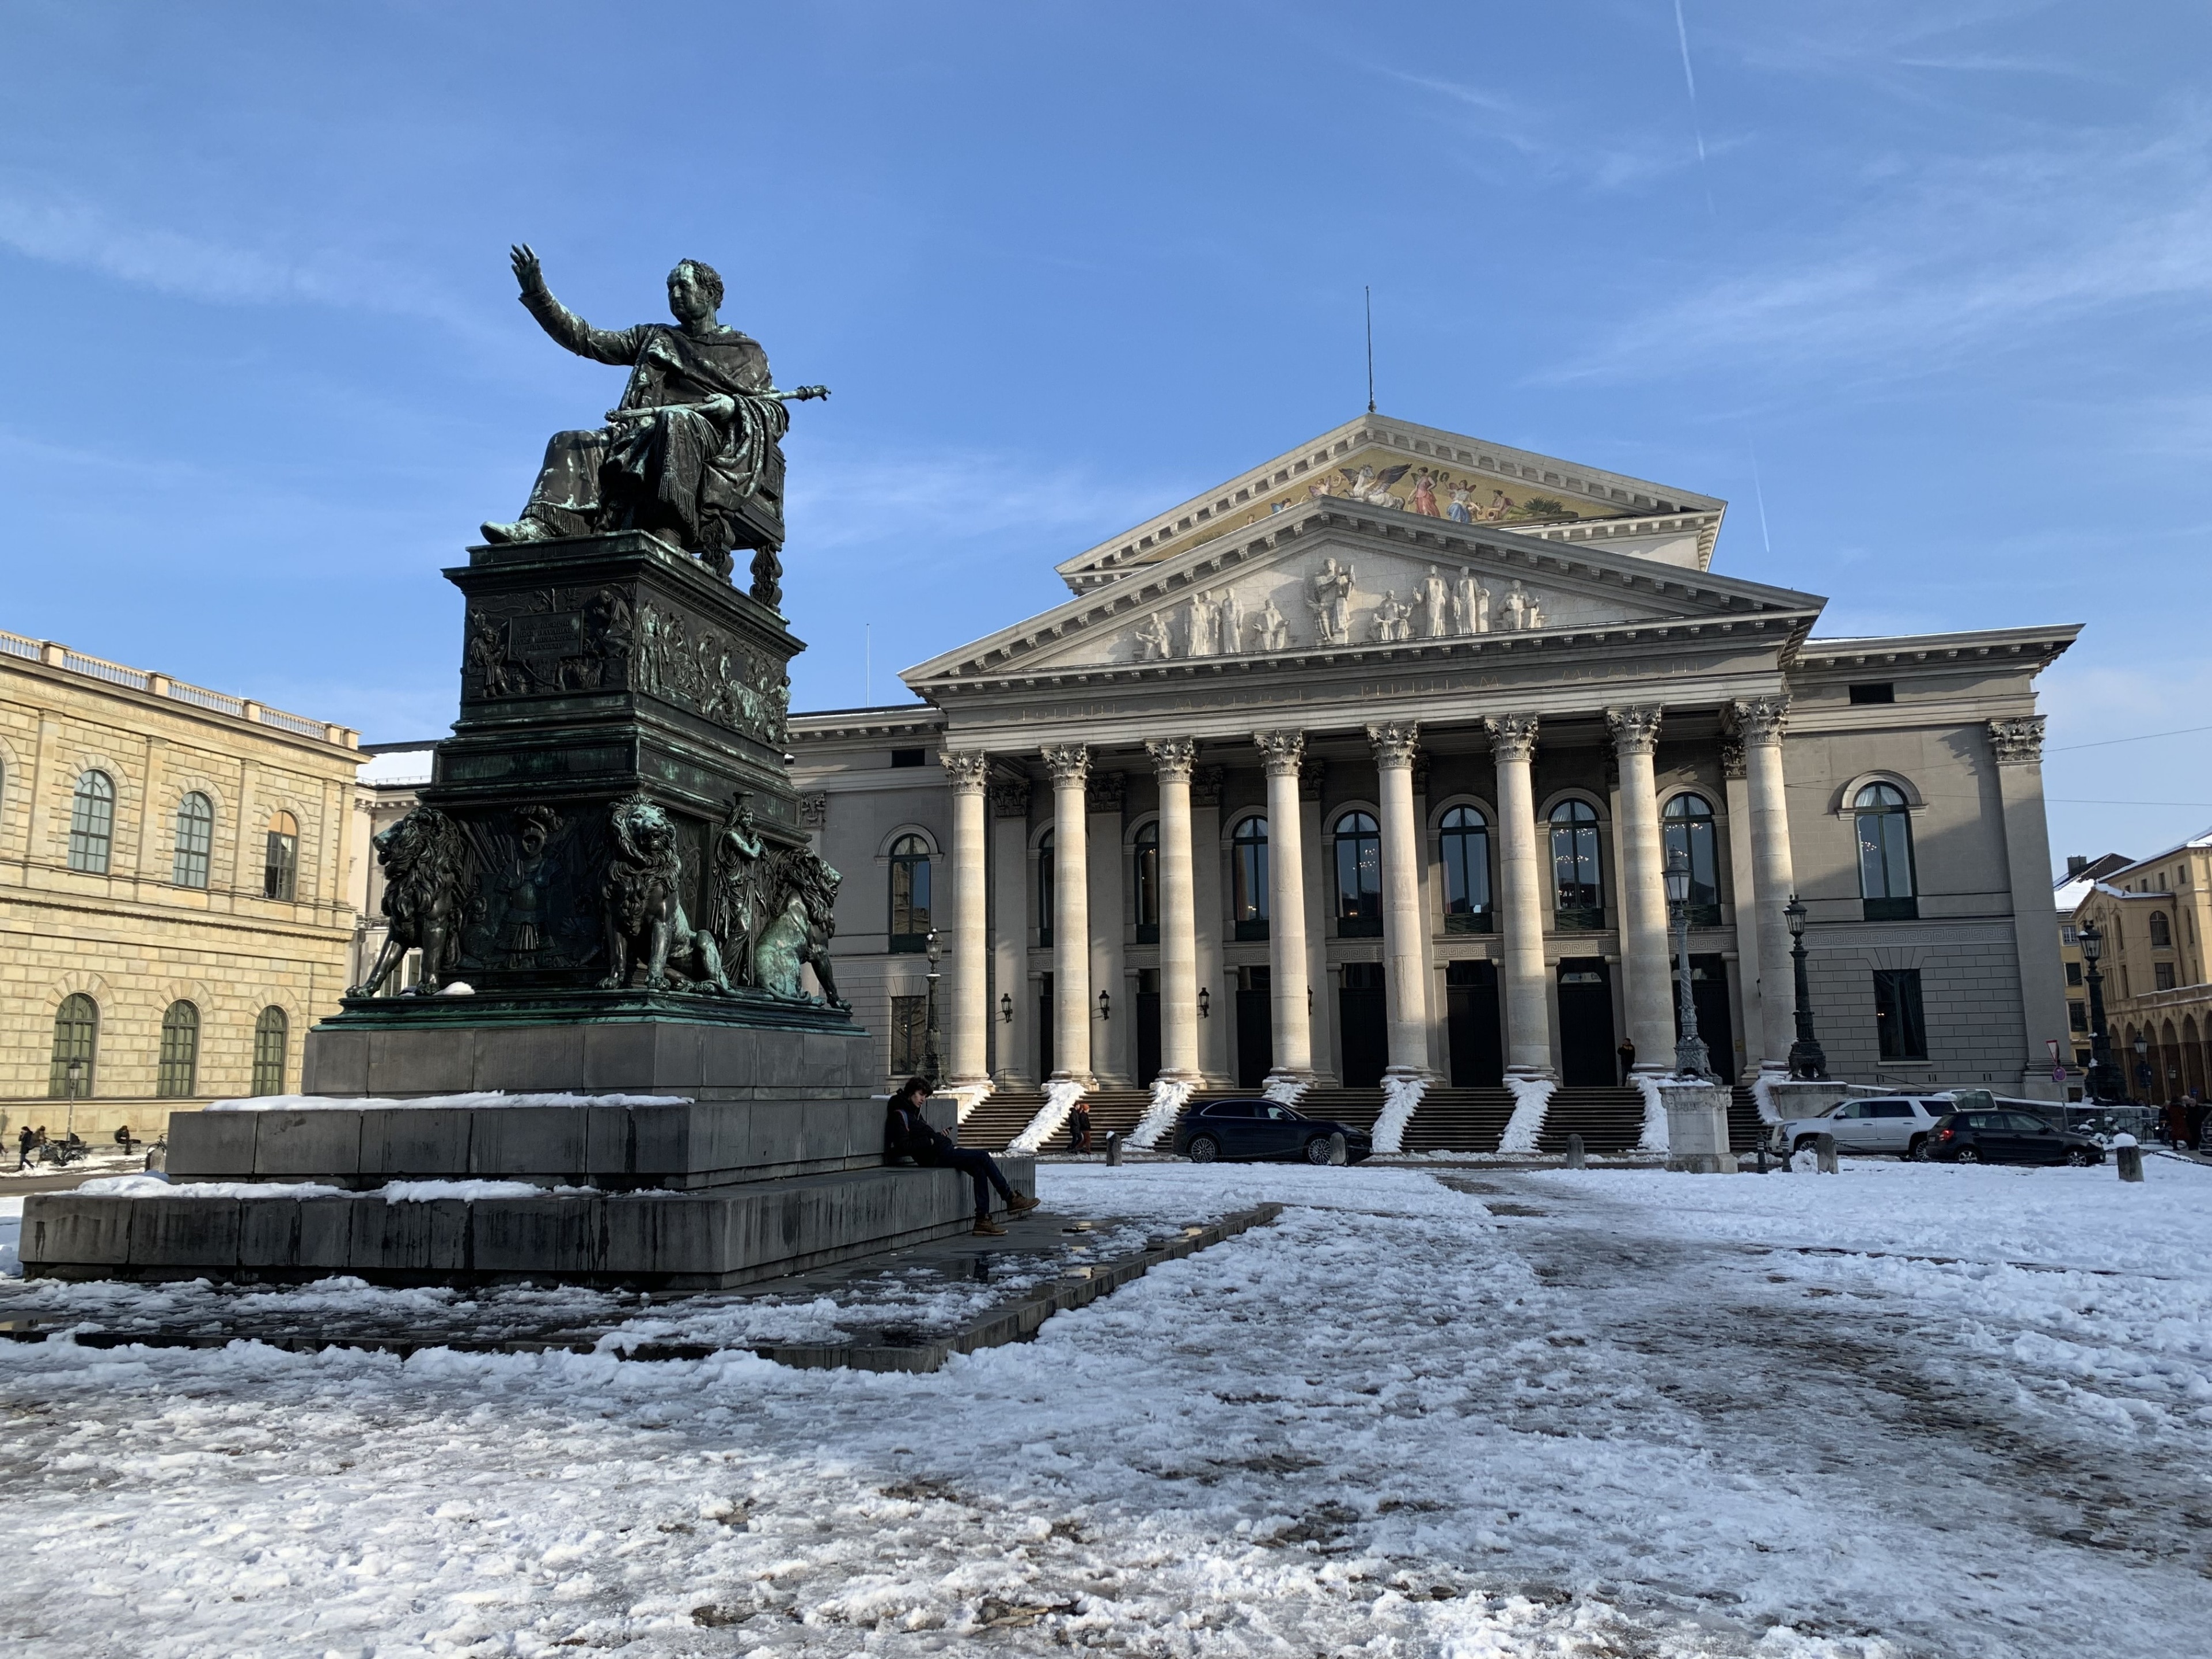 Max Joseph Platz.
The statue of king Maximillian I, behind the statue is the National Theatre Munich.